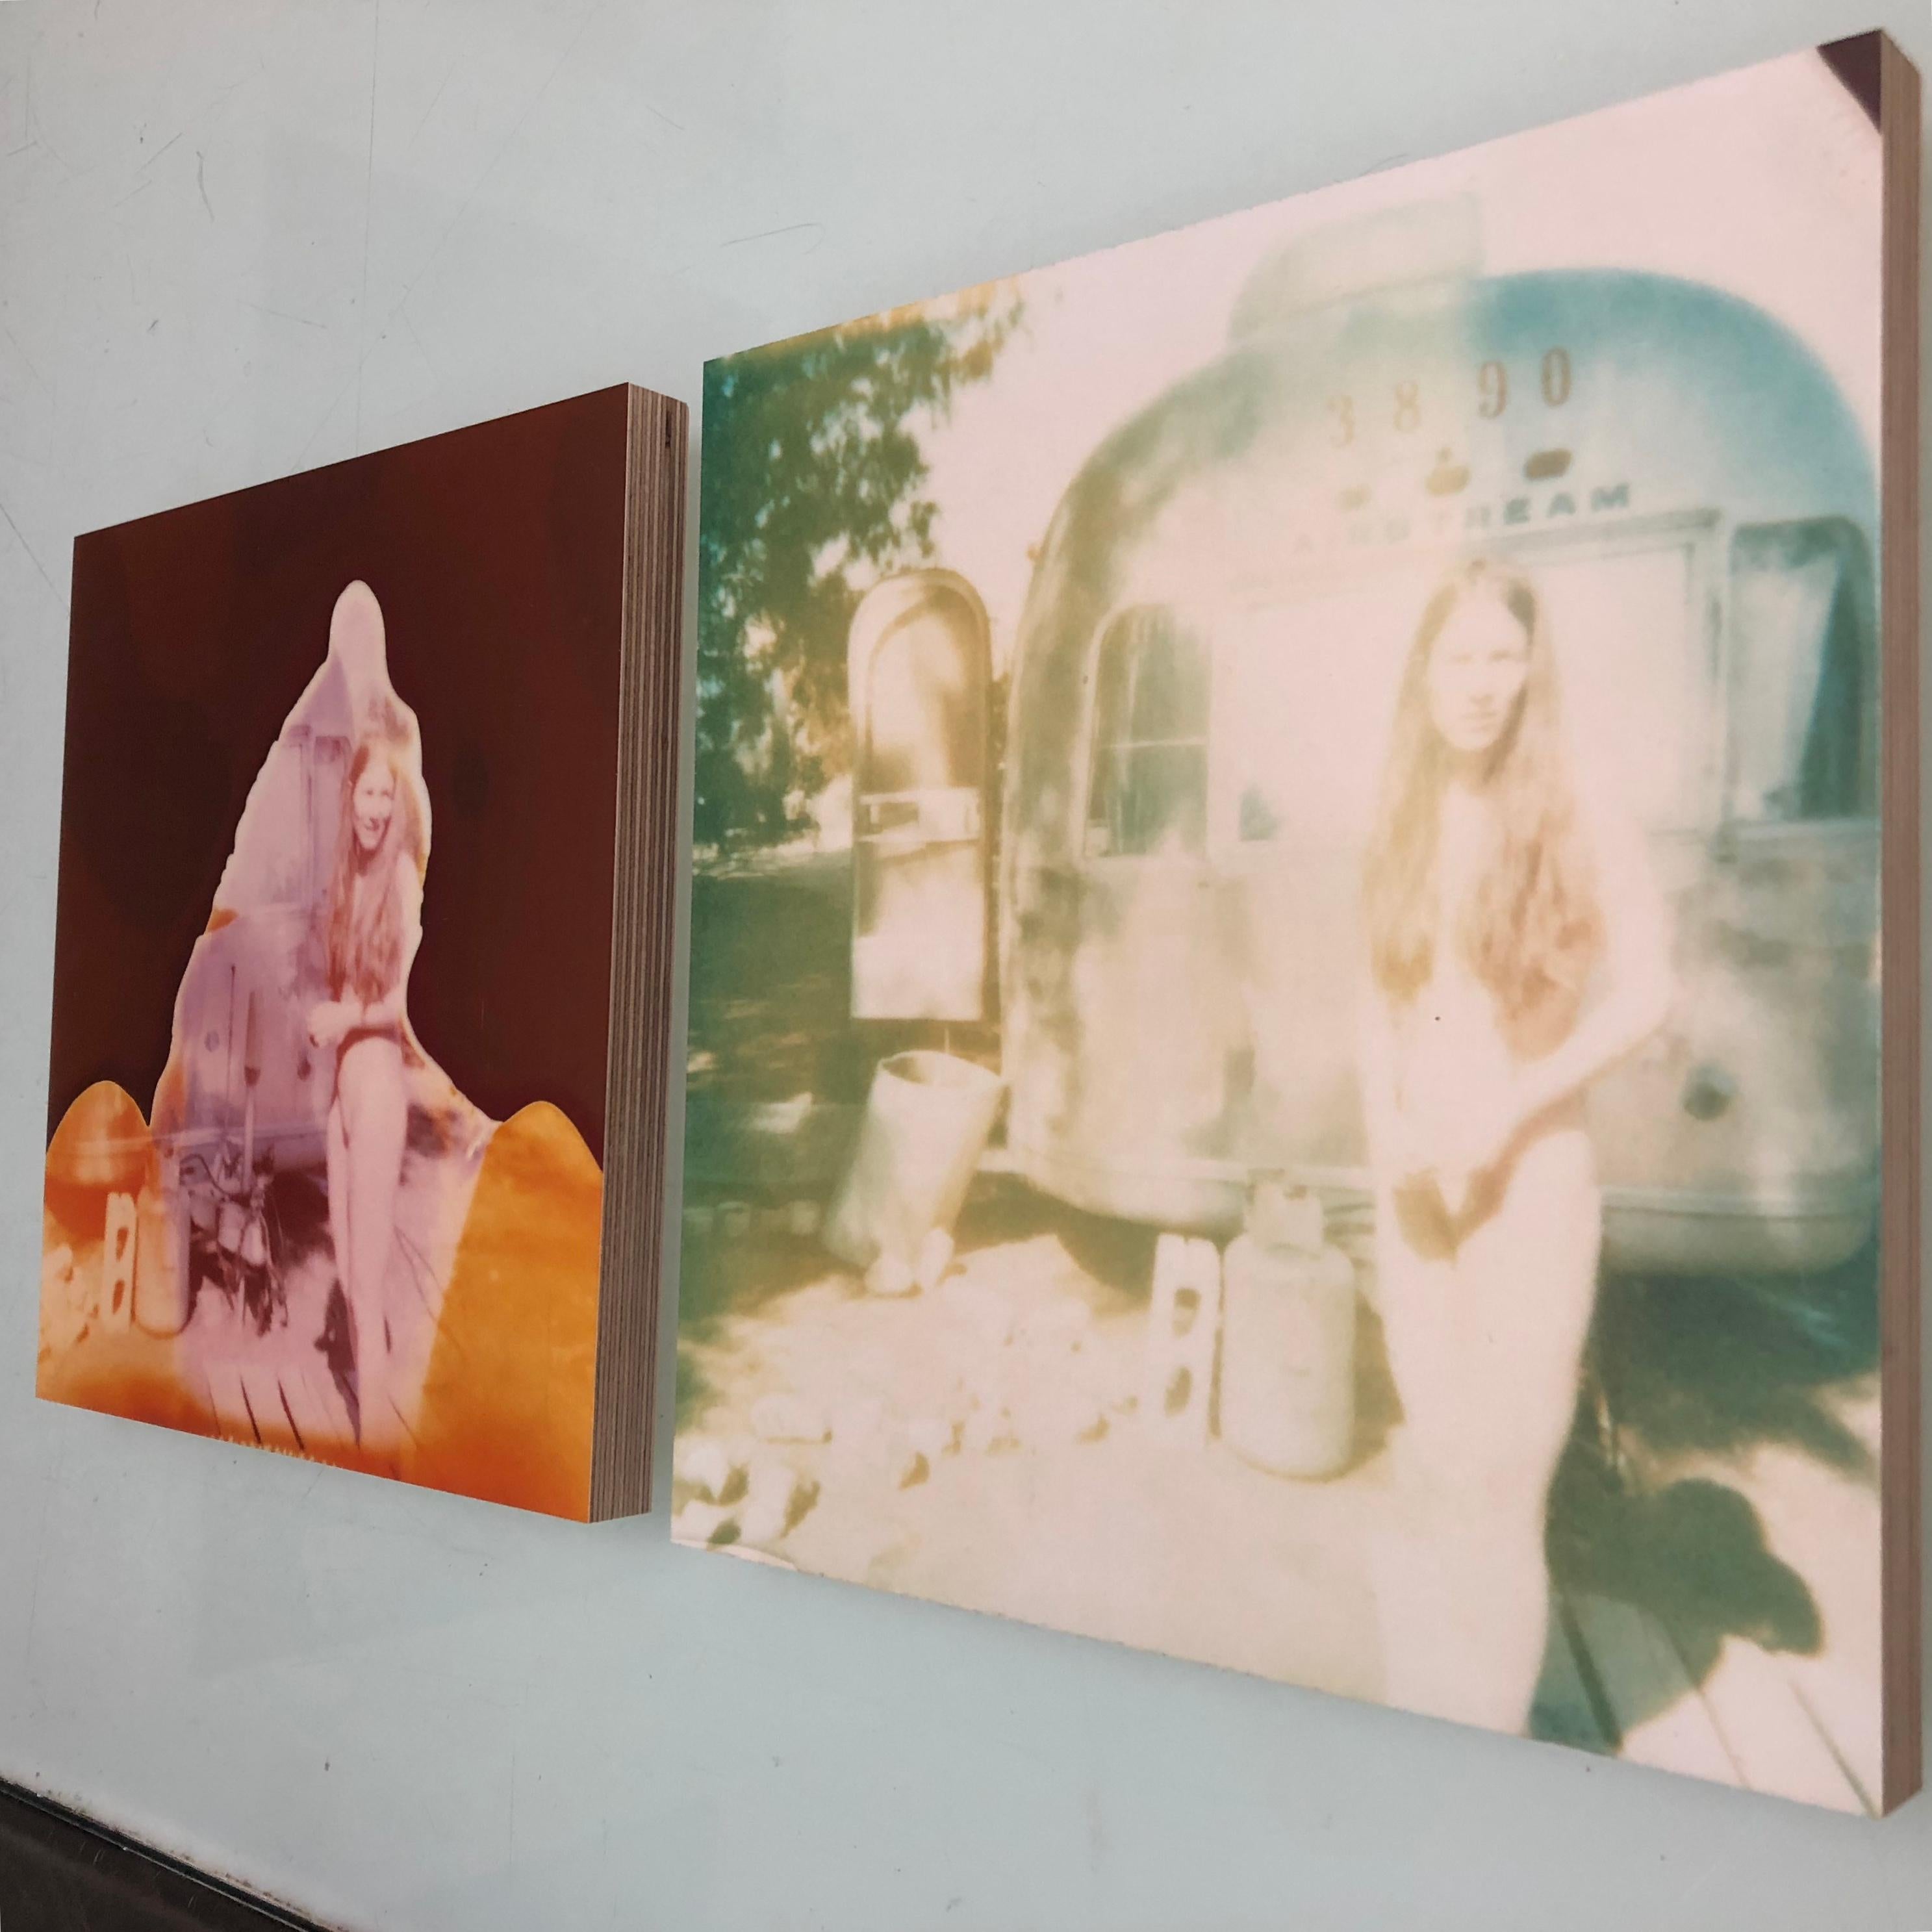 In front of Trailer (Sidewinder), diptych - Polaroid, Nude, Contemporary, Analog For Sale 4